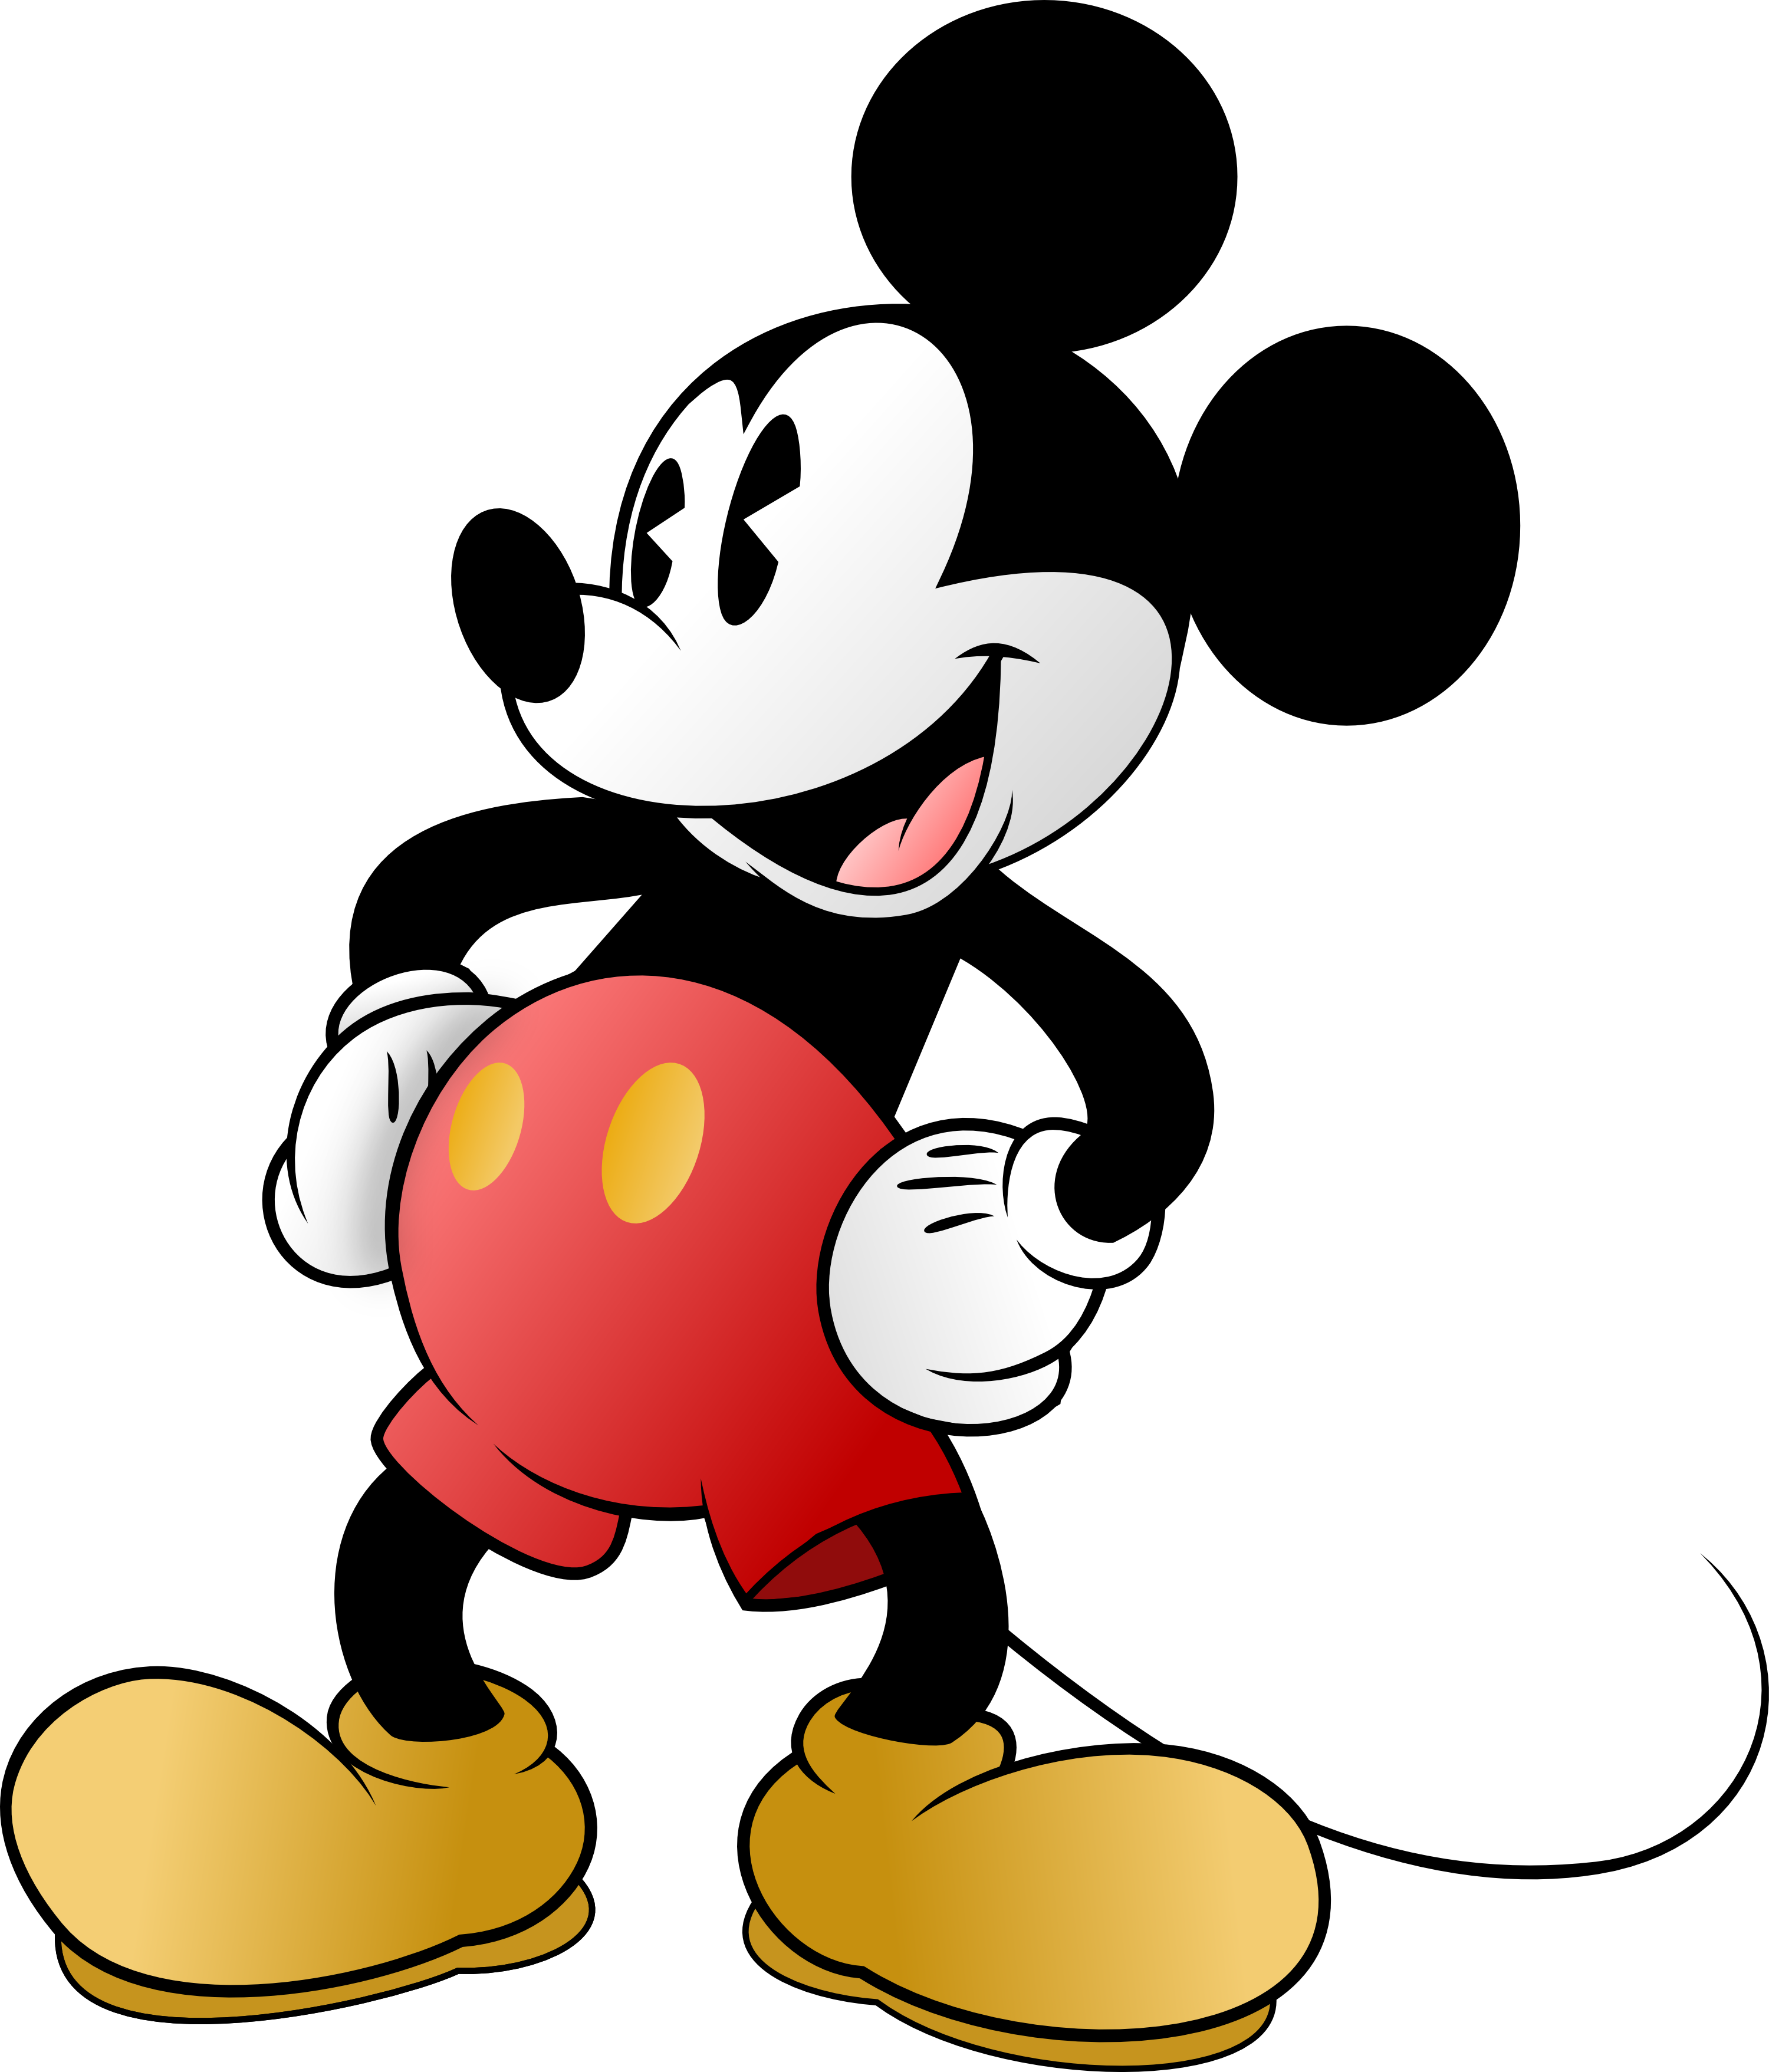 Mickey Mouse Images Collection (48+)